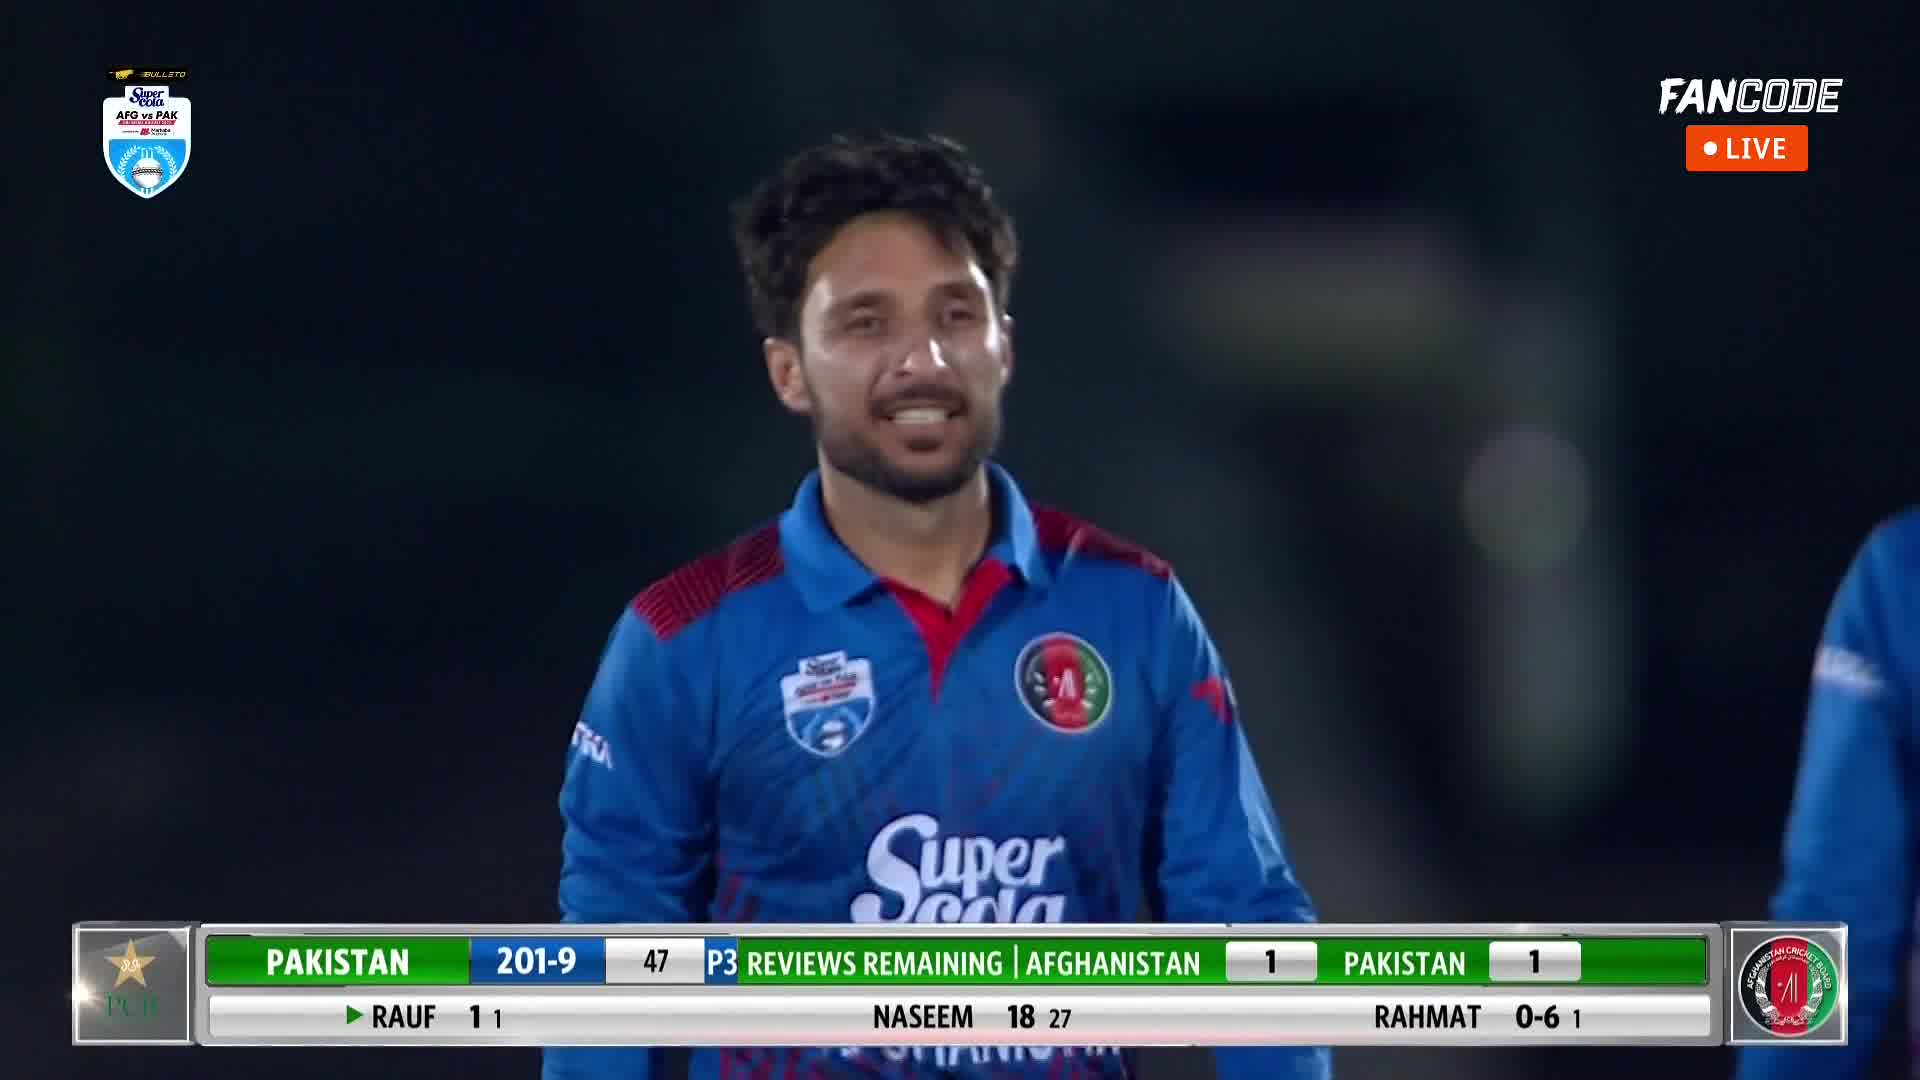 Wicket! Rahmat Wraps Up The Pakistan Innings, Afghanistan Restrict Pakistan To 201